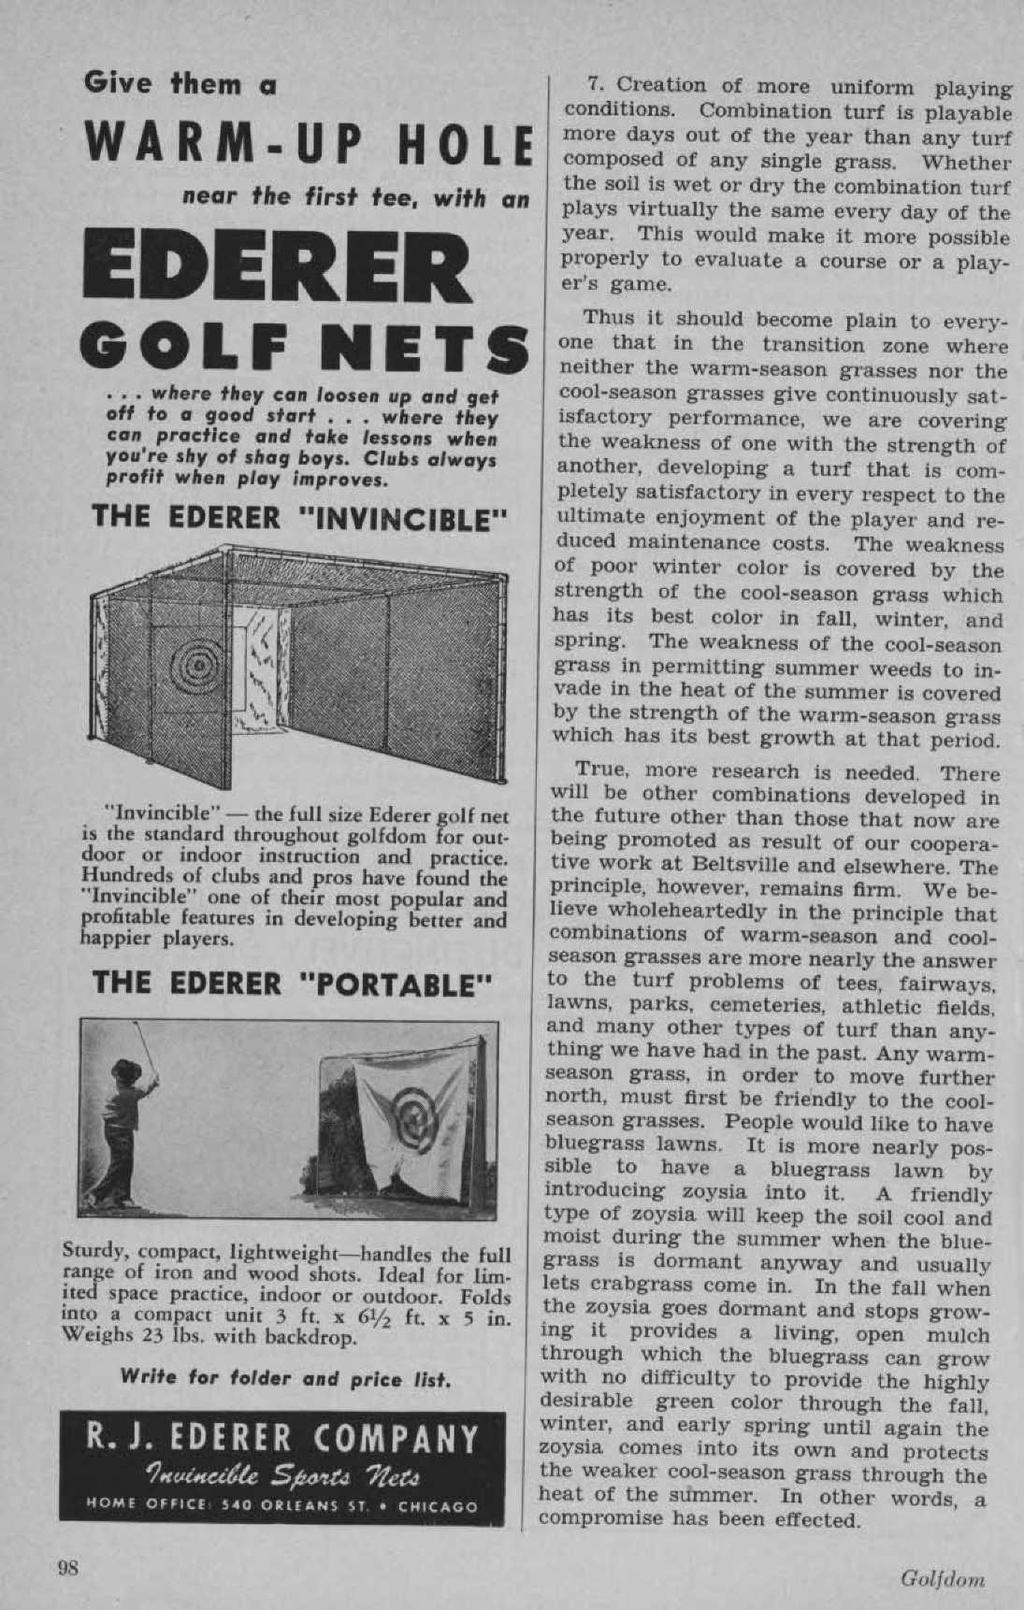 Give them a WARM-UP HOLE near the first tee, with an EDERER GOLF NETS... where they con loosen up and get oft to a good start... where they can practice and take lessons when you're shy of shag boys.